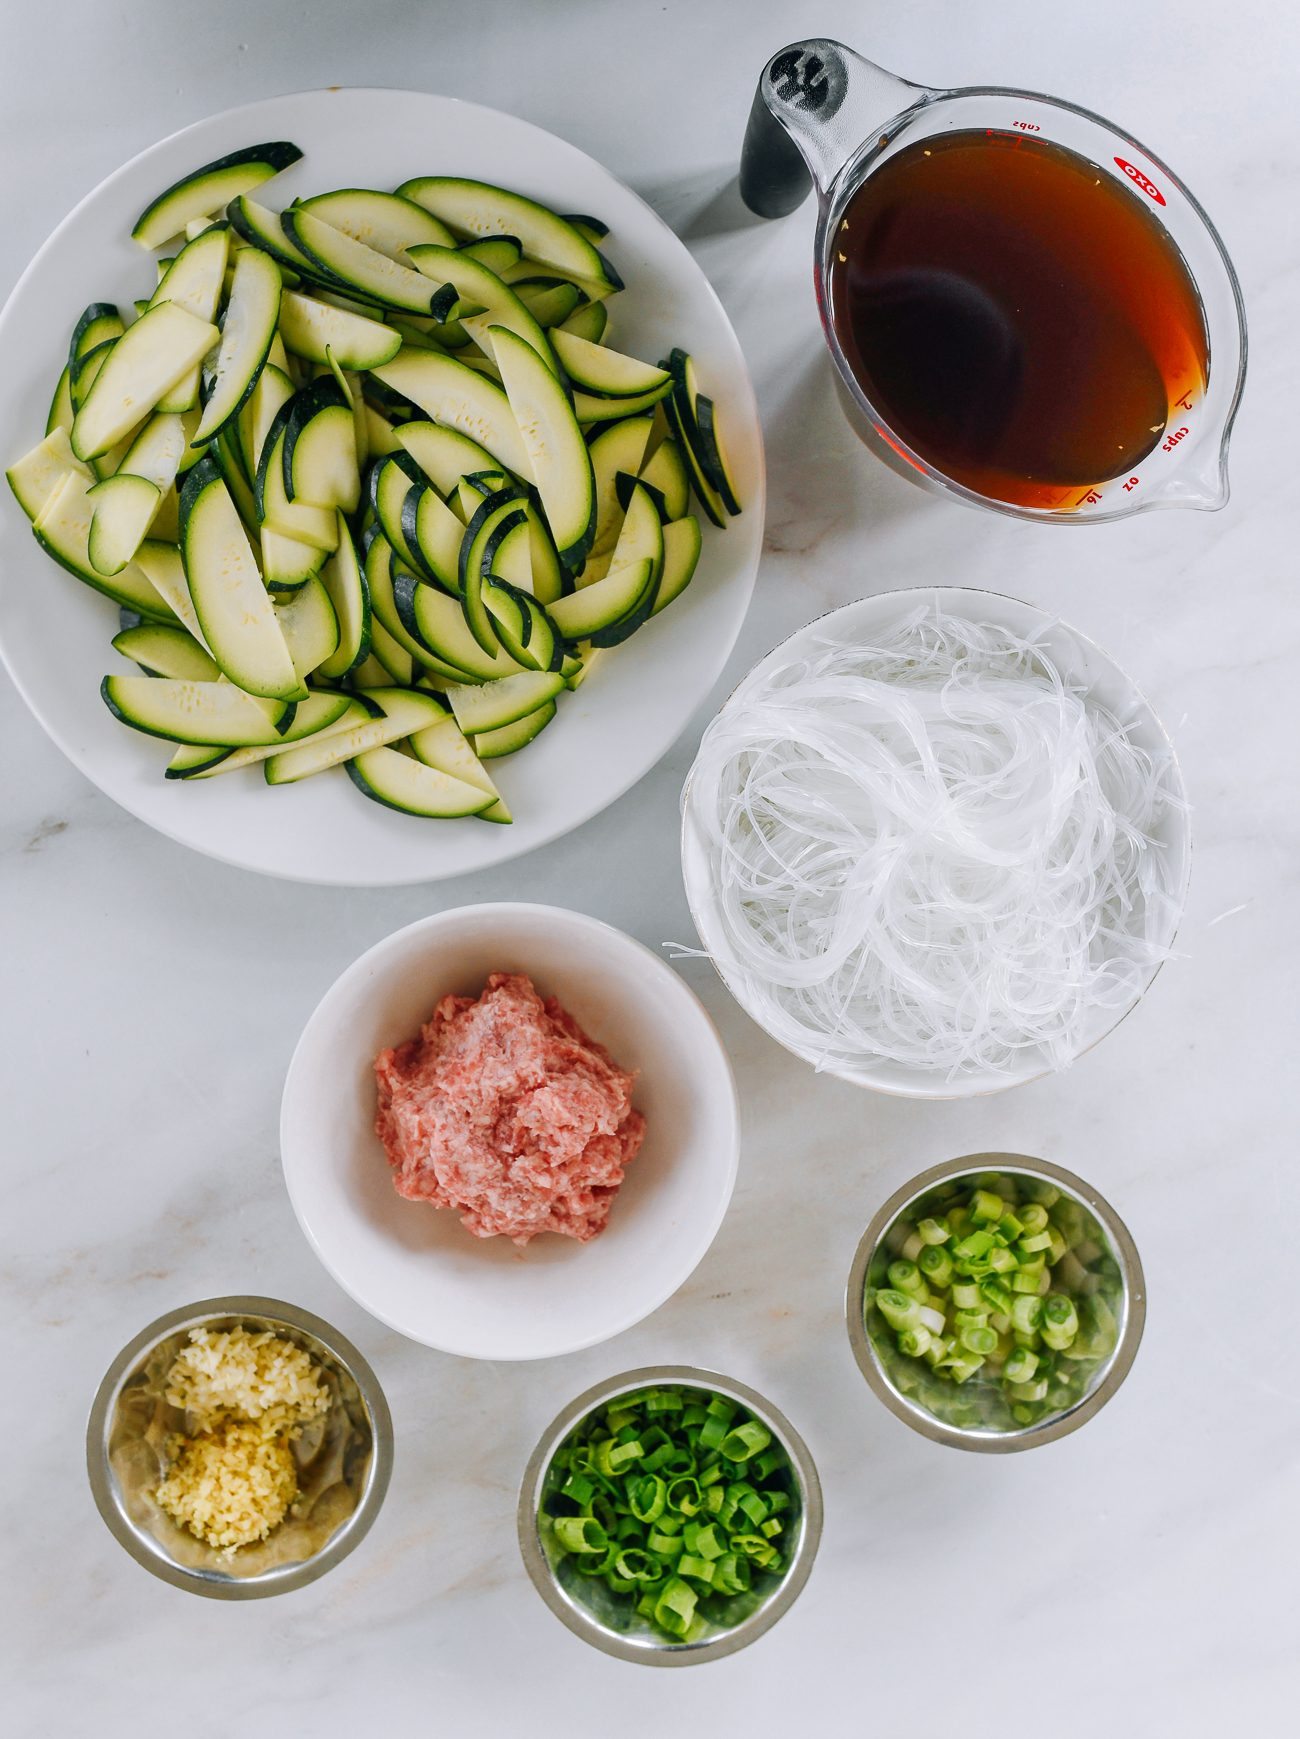 ingredients for zucchini with glass noodles